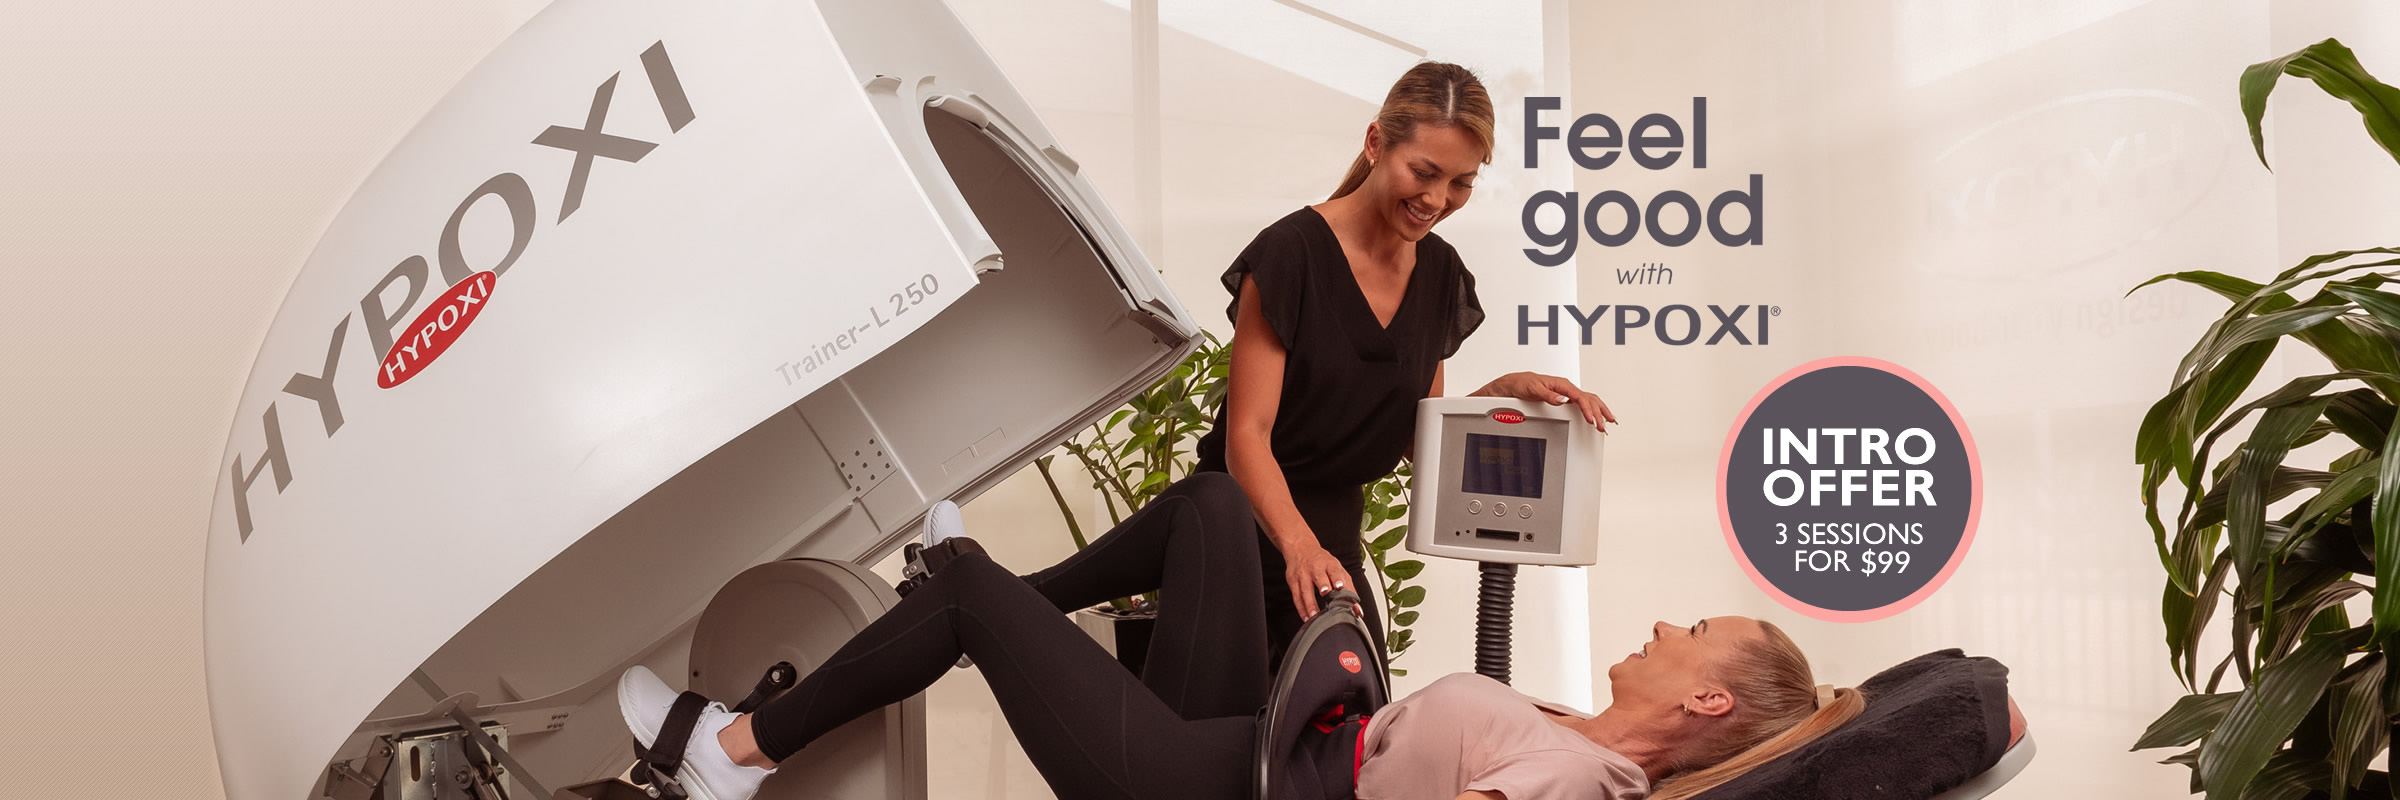 Hypoxi Mentone | Cellulite and fat reduction solutions